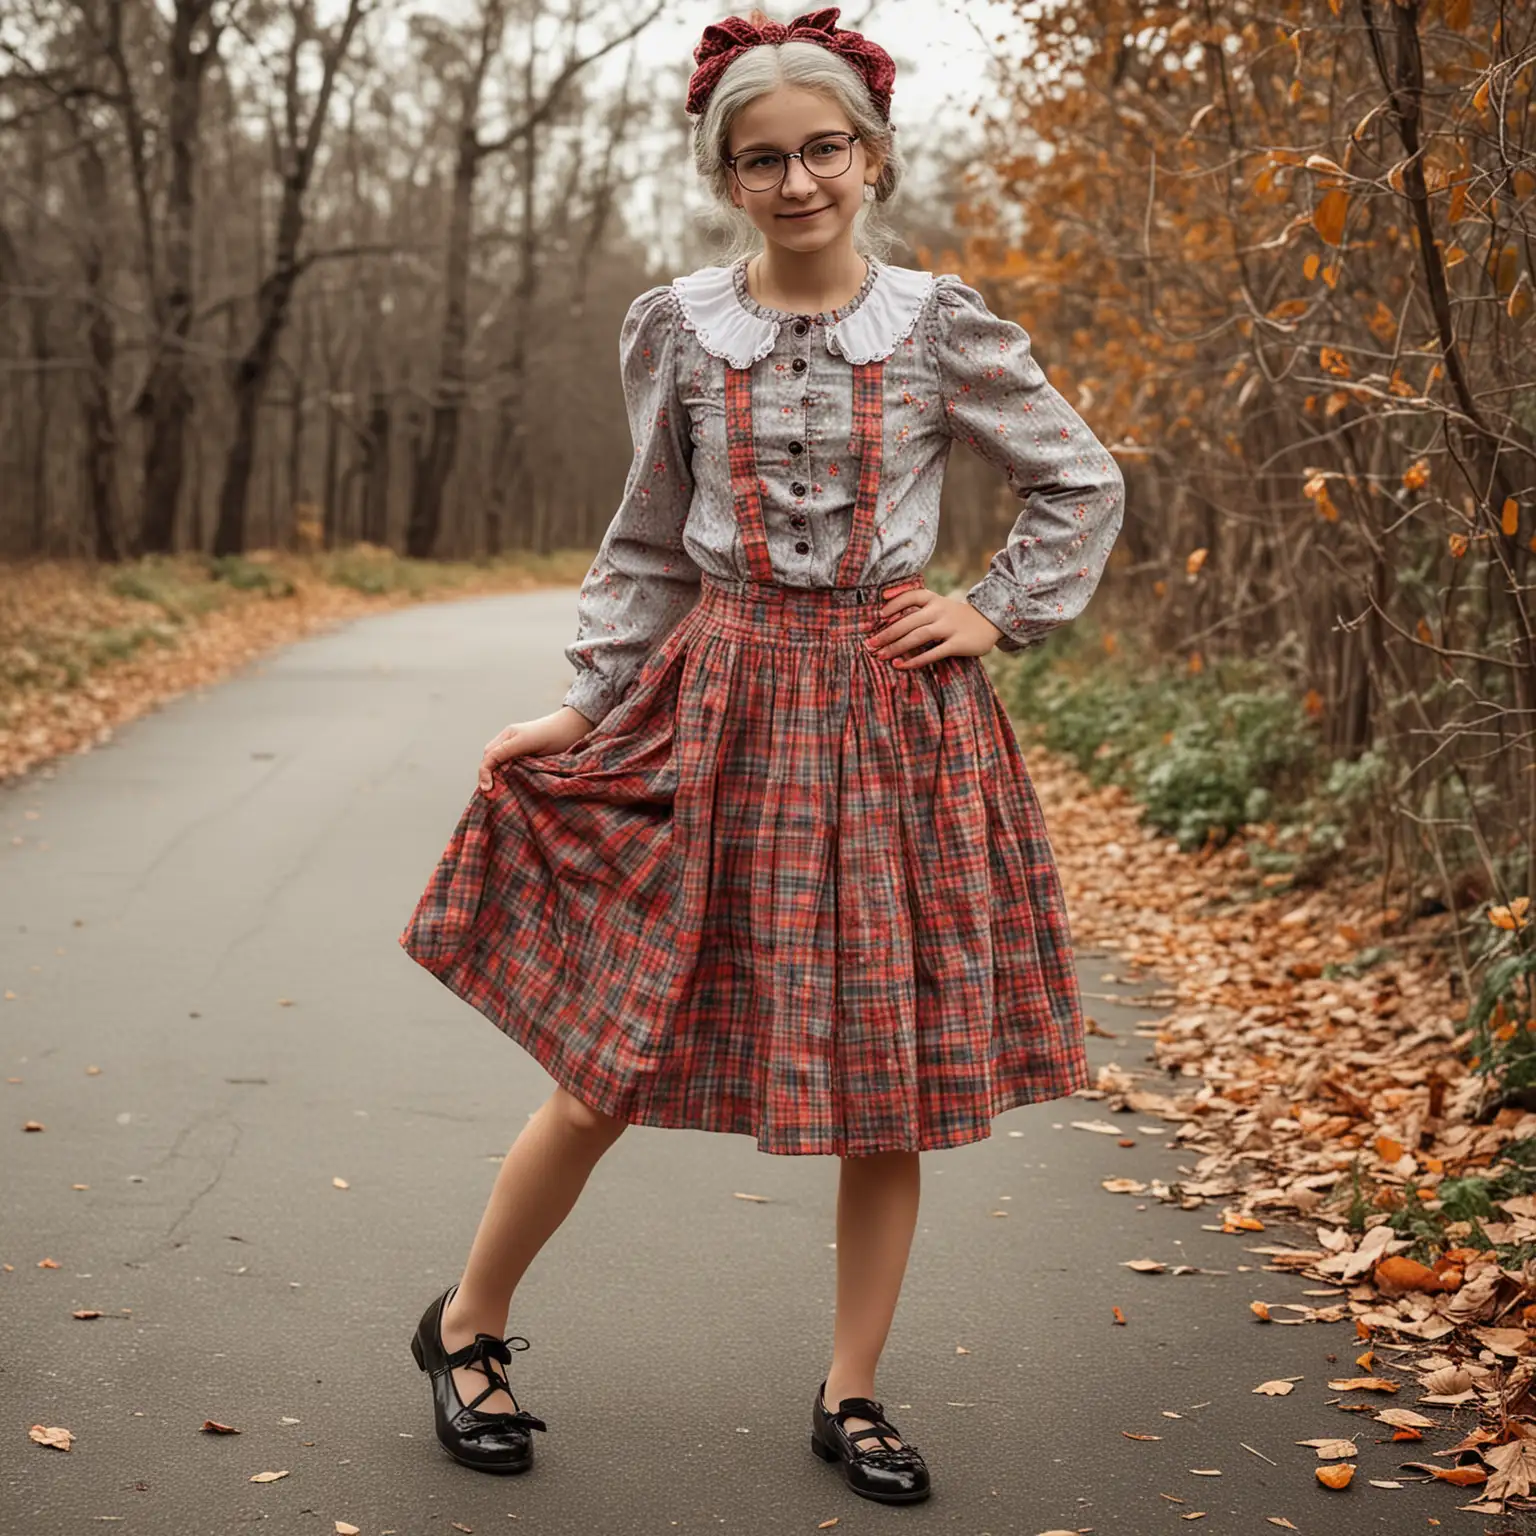 Teenage Girl in Halloween Granny Costume with Shoes